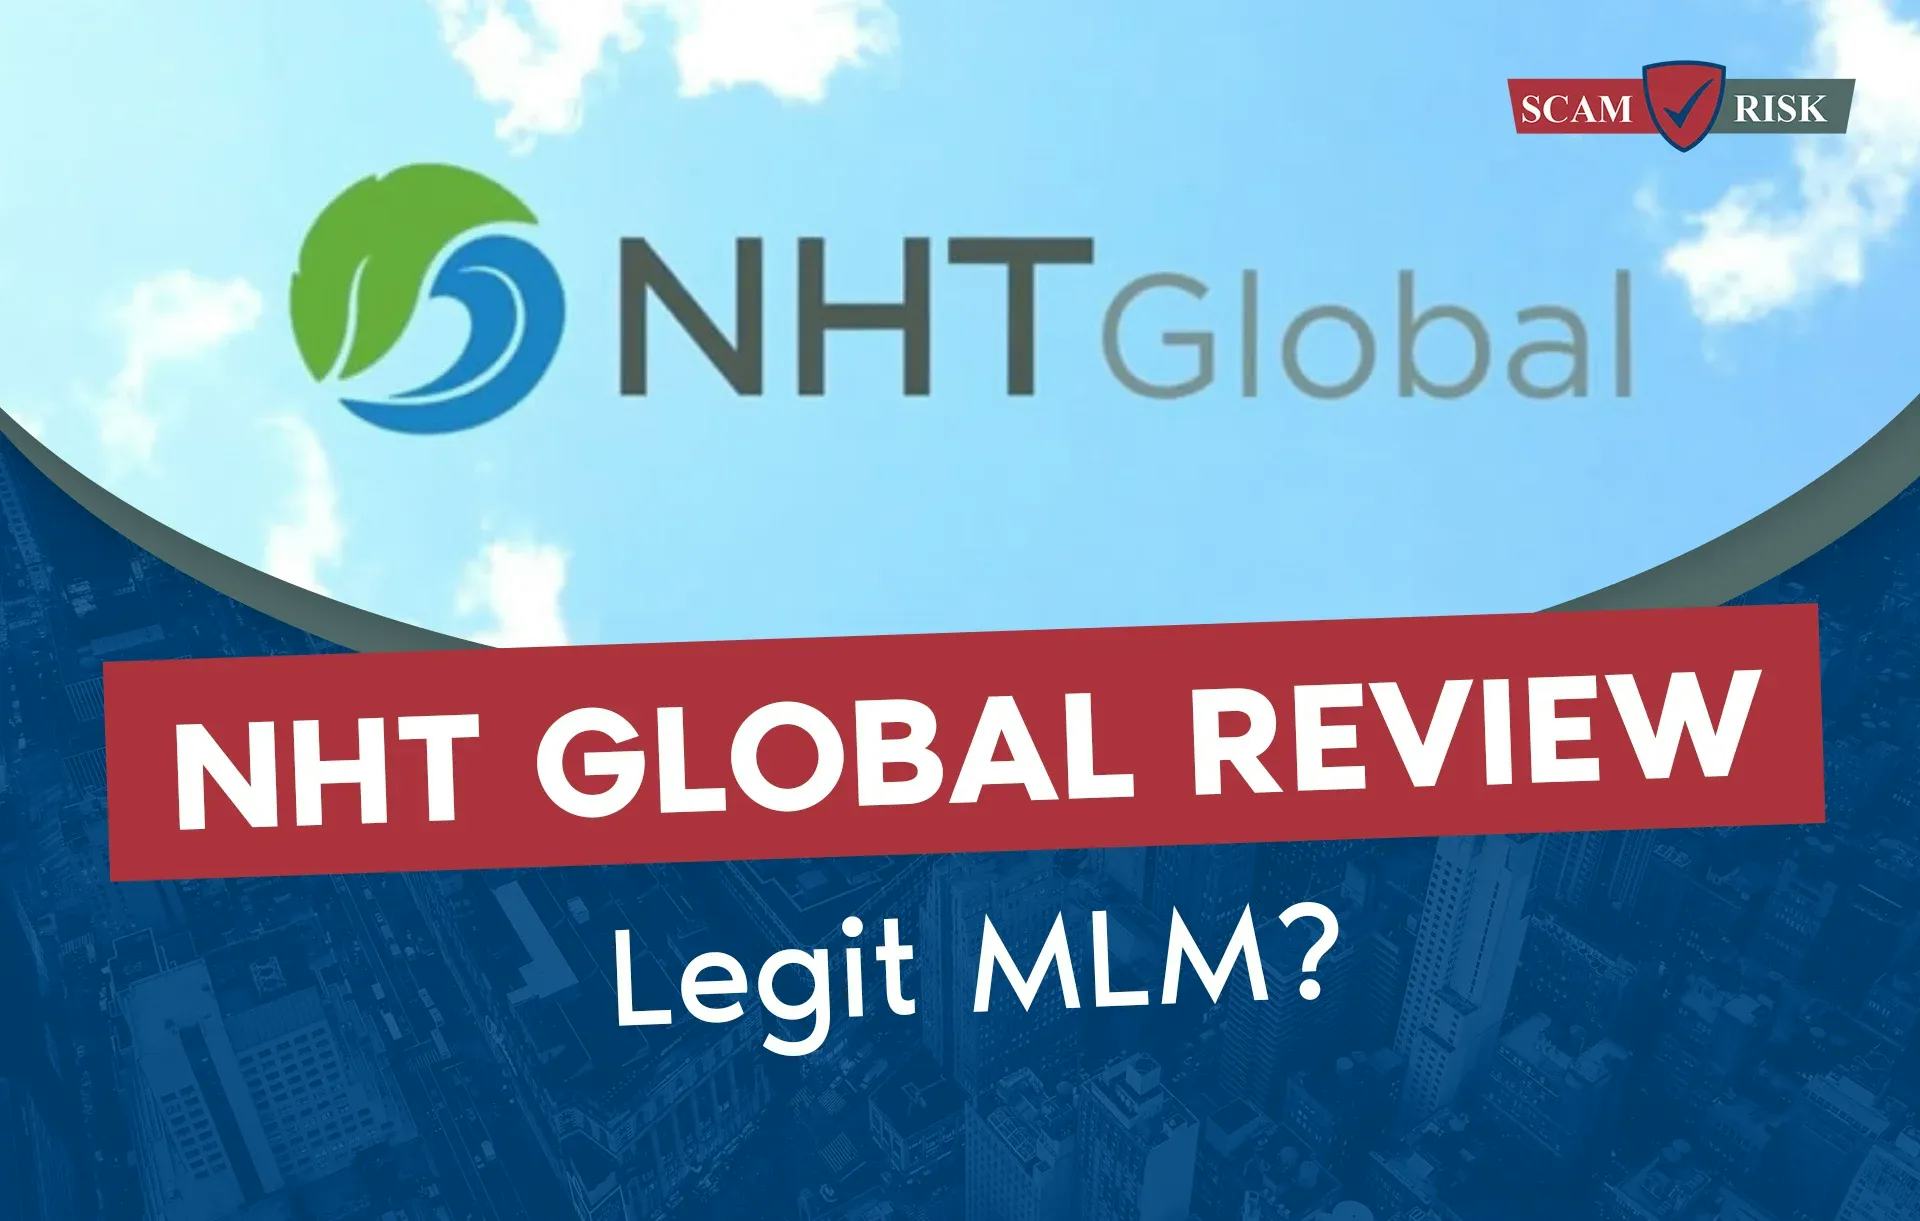 NHT Global Reviews